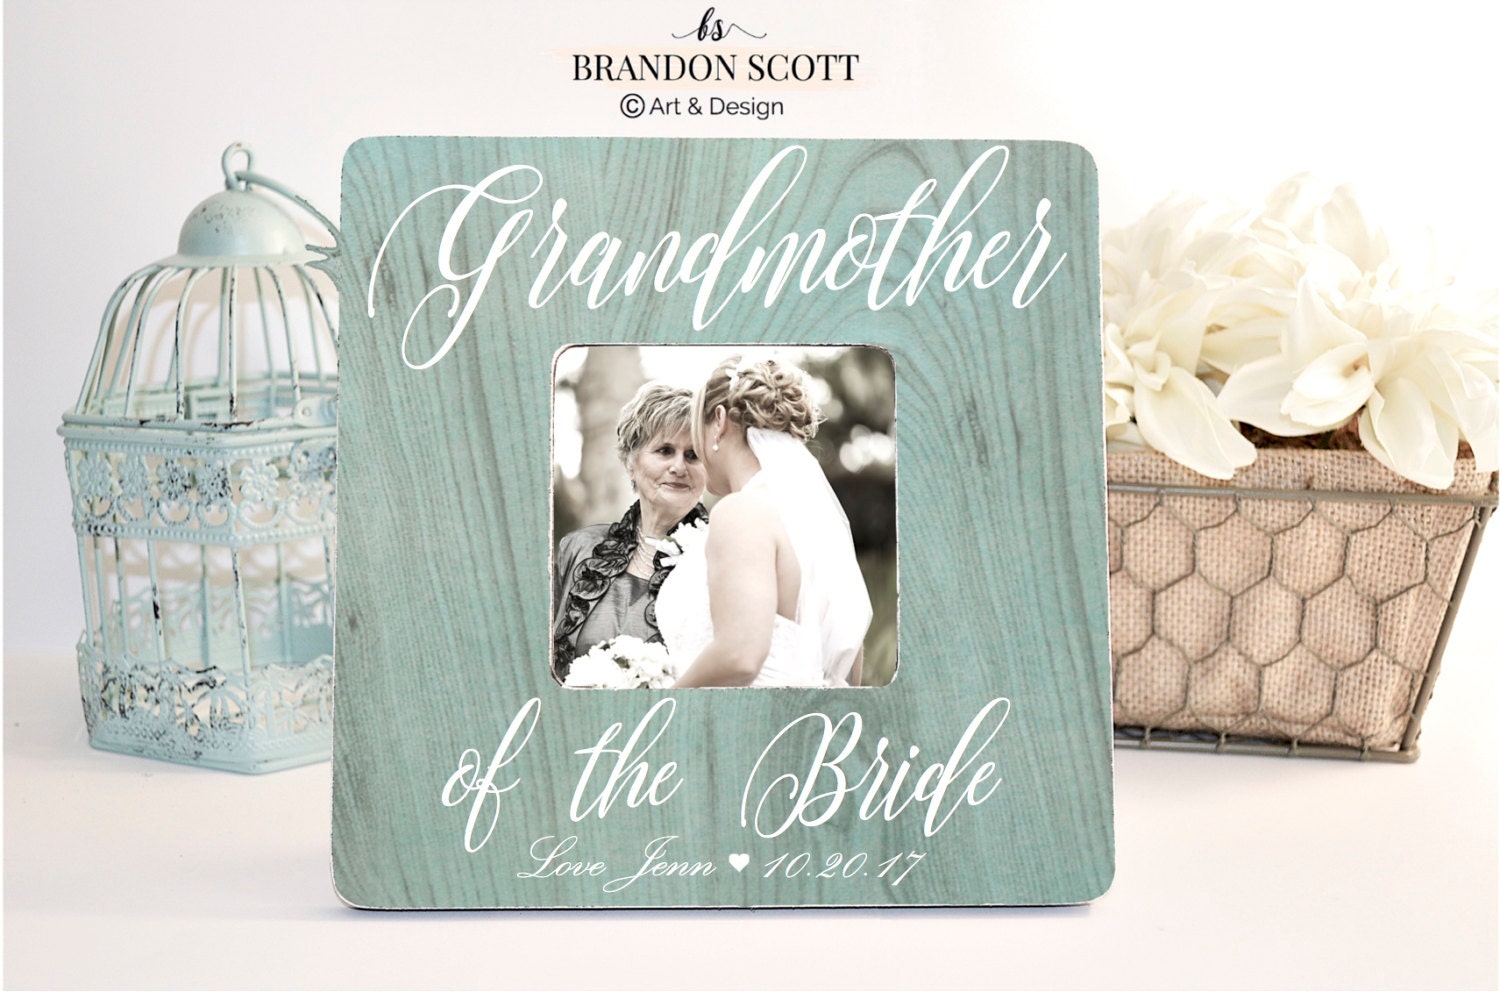 Mother of the Bride Gift Box Mother of the Groom Gift Ideas EB3250POPMOM  Complete Gift Set 